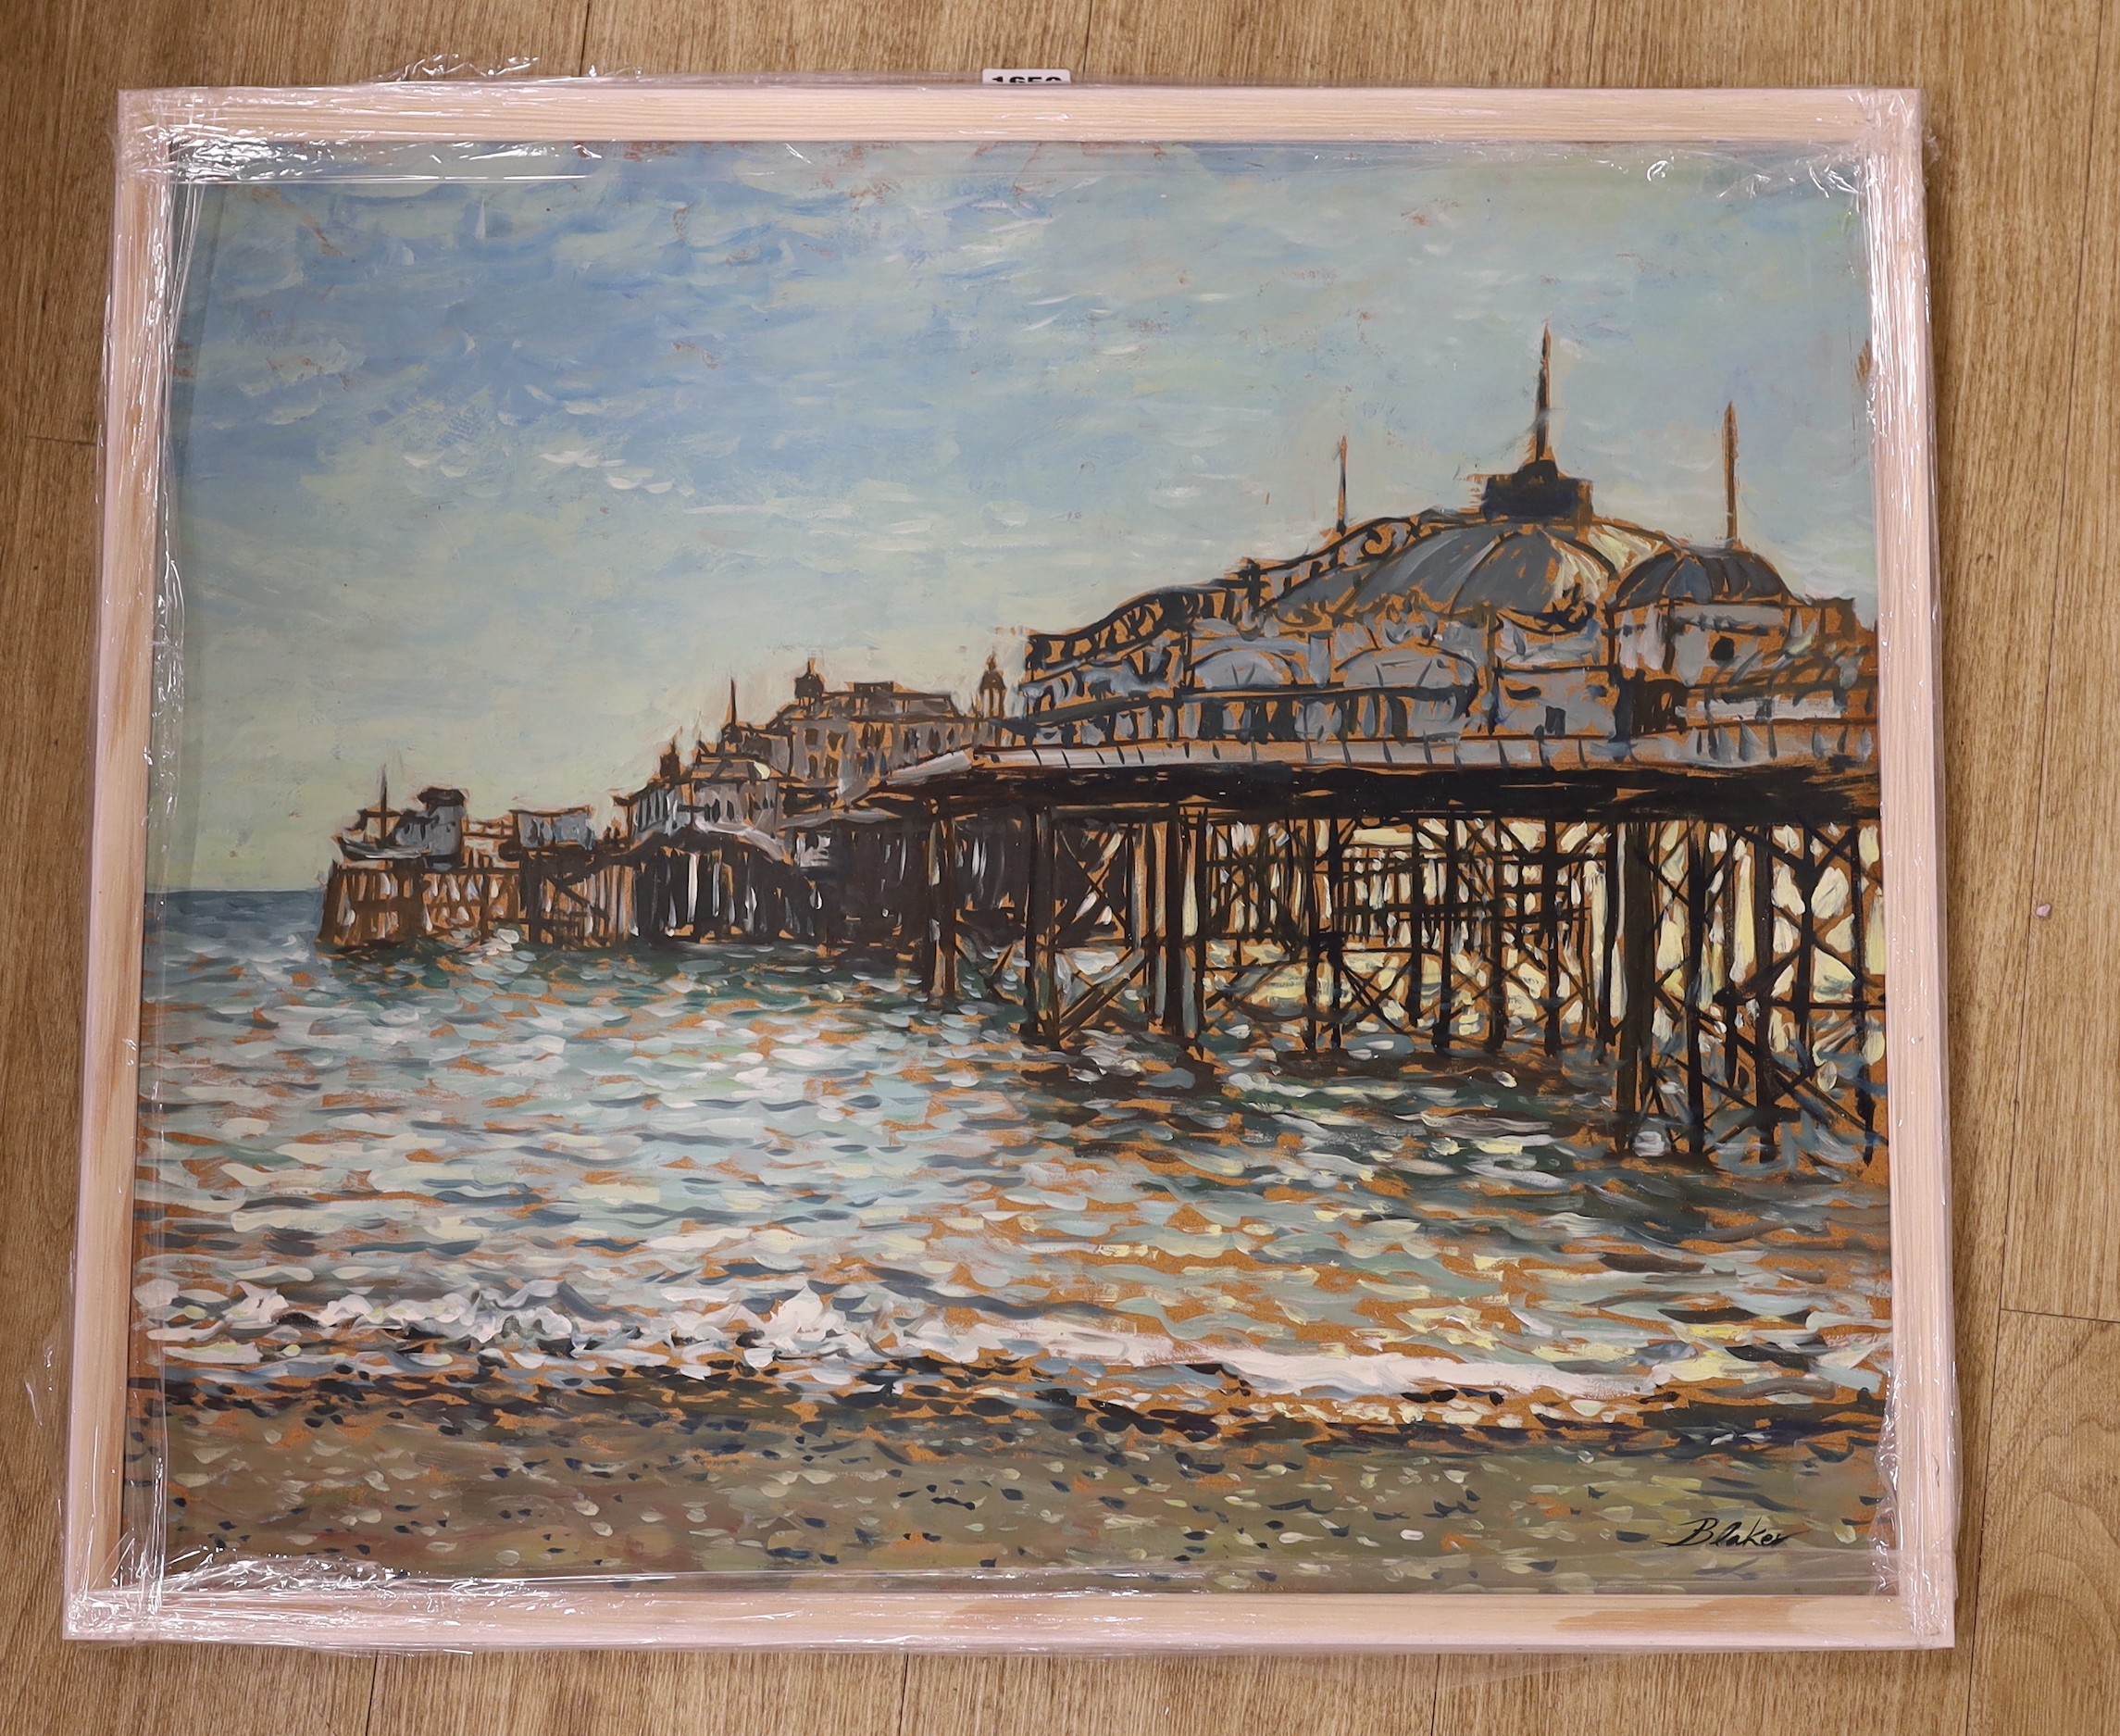 Michael Blaker (1928-2018), oil on board, The Palace Pier, Brighton, signed, 51 x 60cm